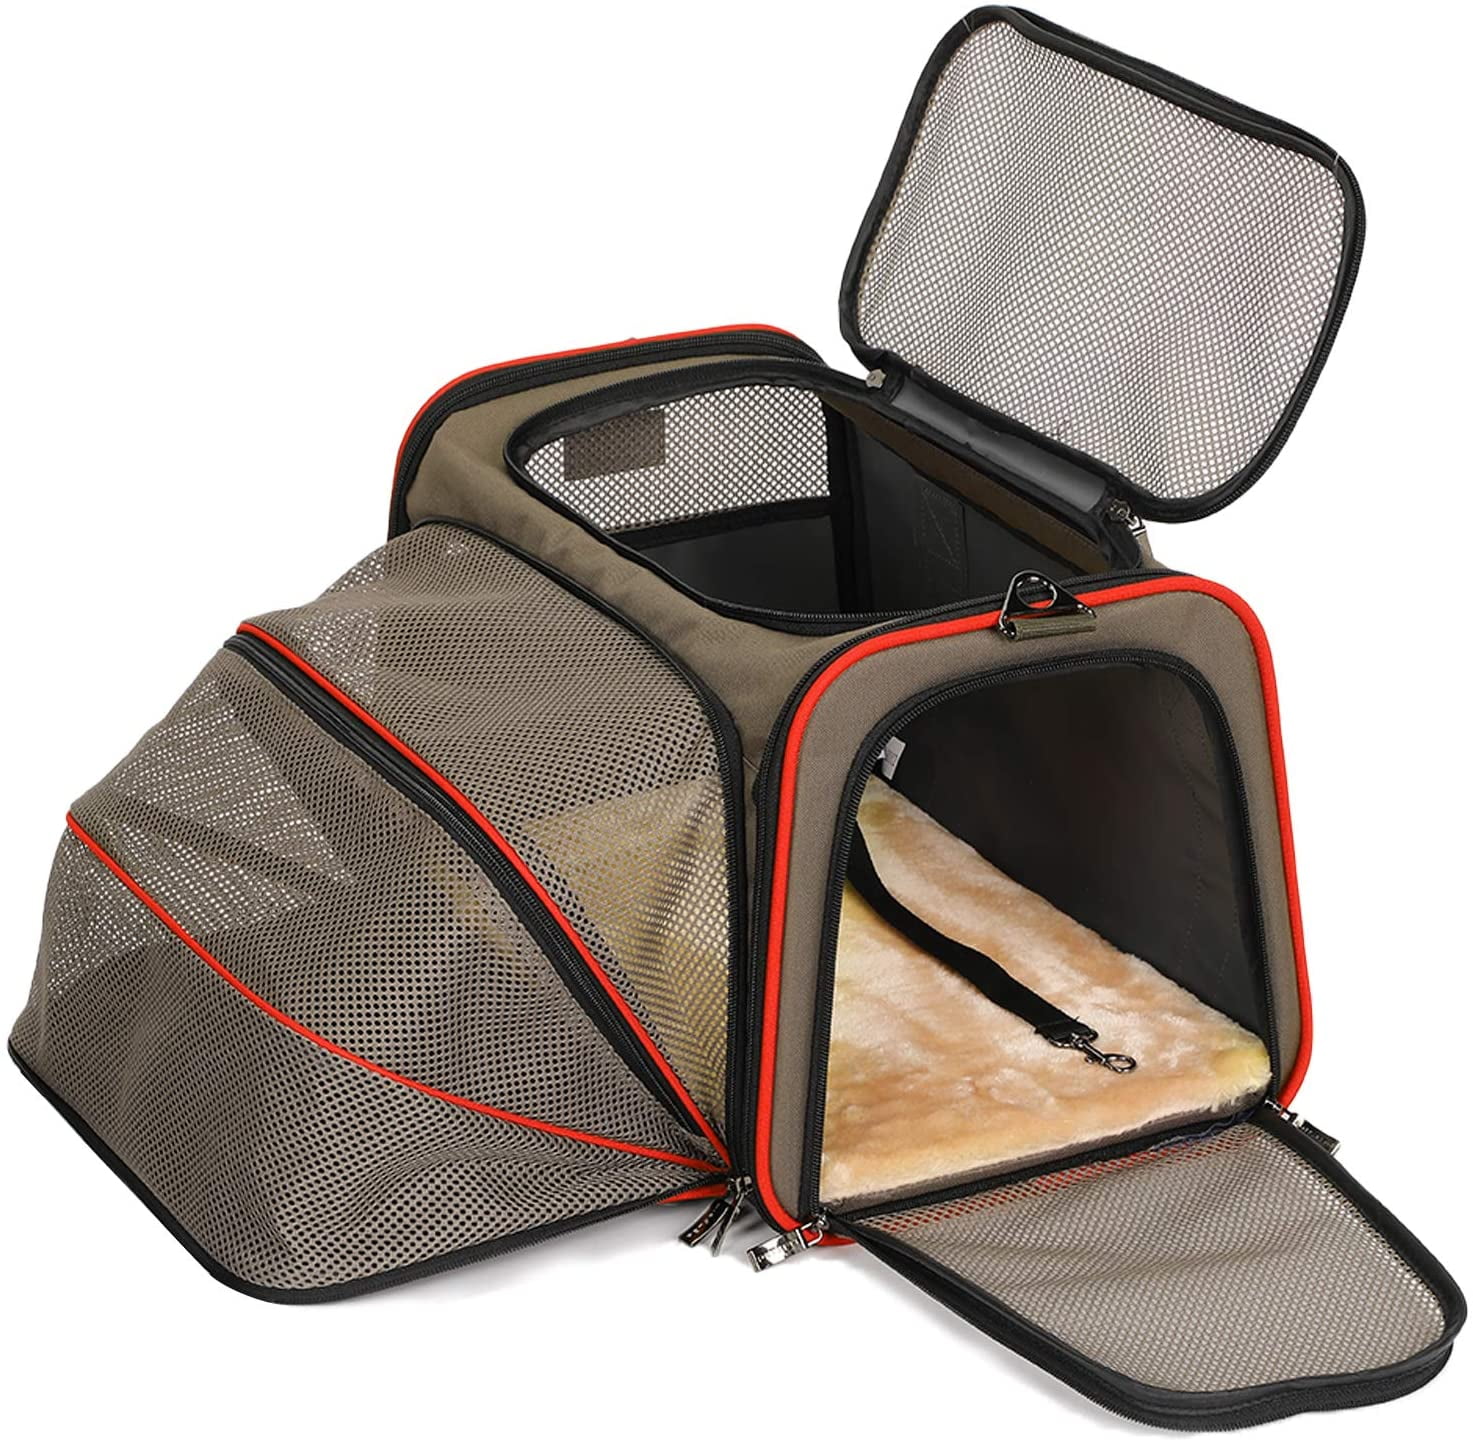 Coopeter Luxury Soft-Sided Pet Carrier Expandable,Pet Travel Carrier for Dog & Cat 